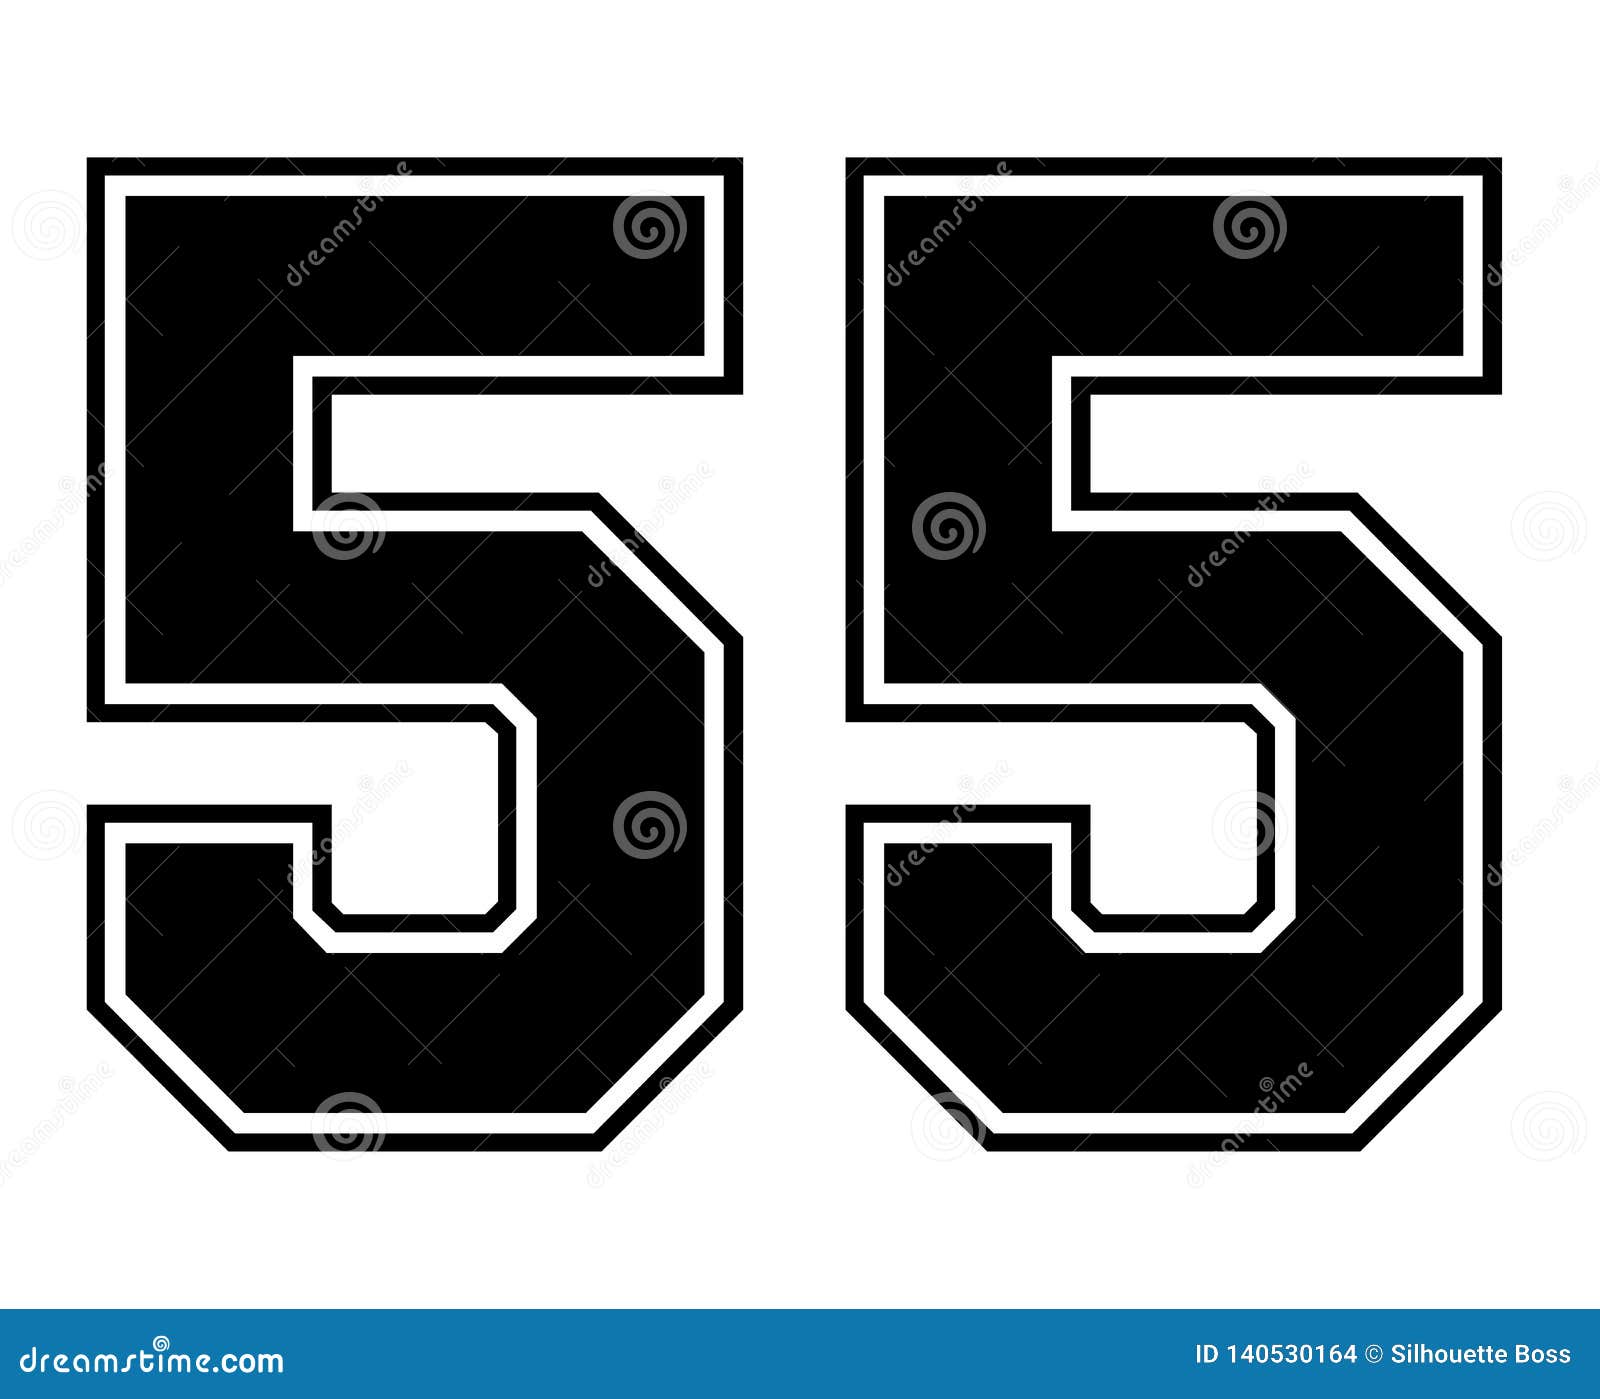 jersey number 55